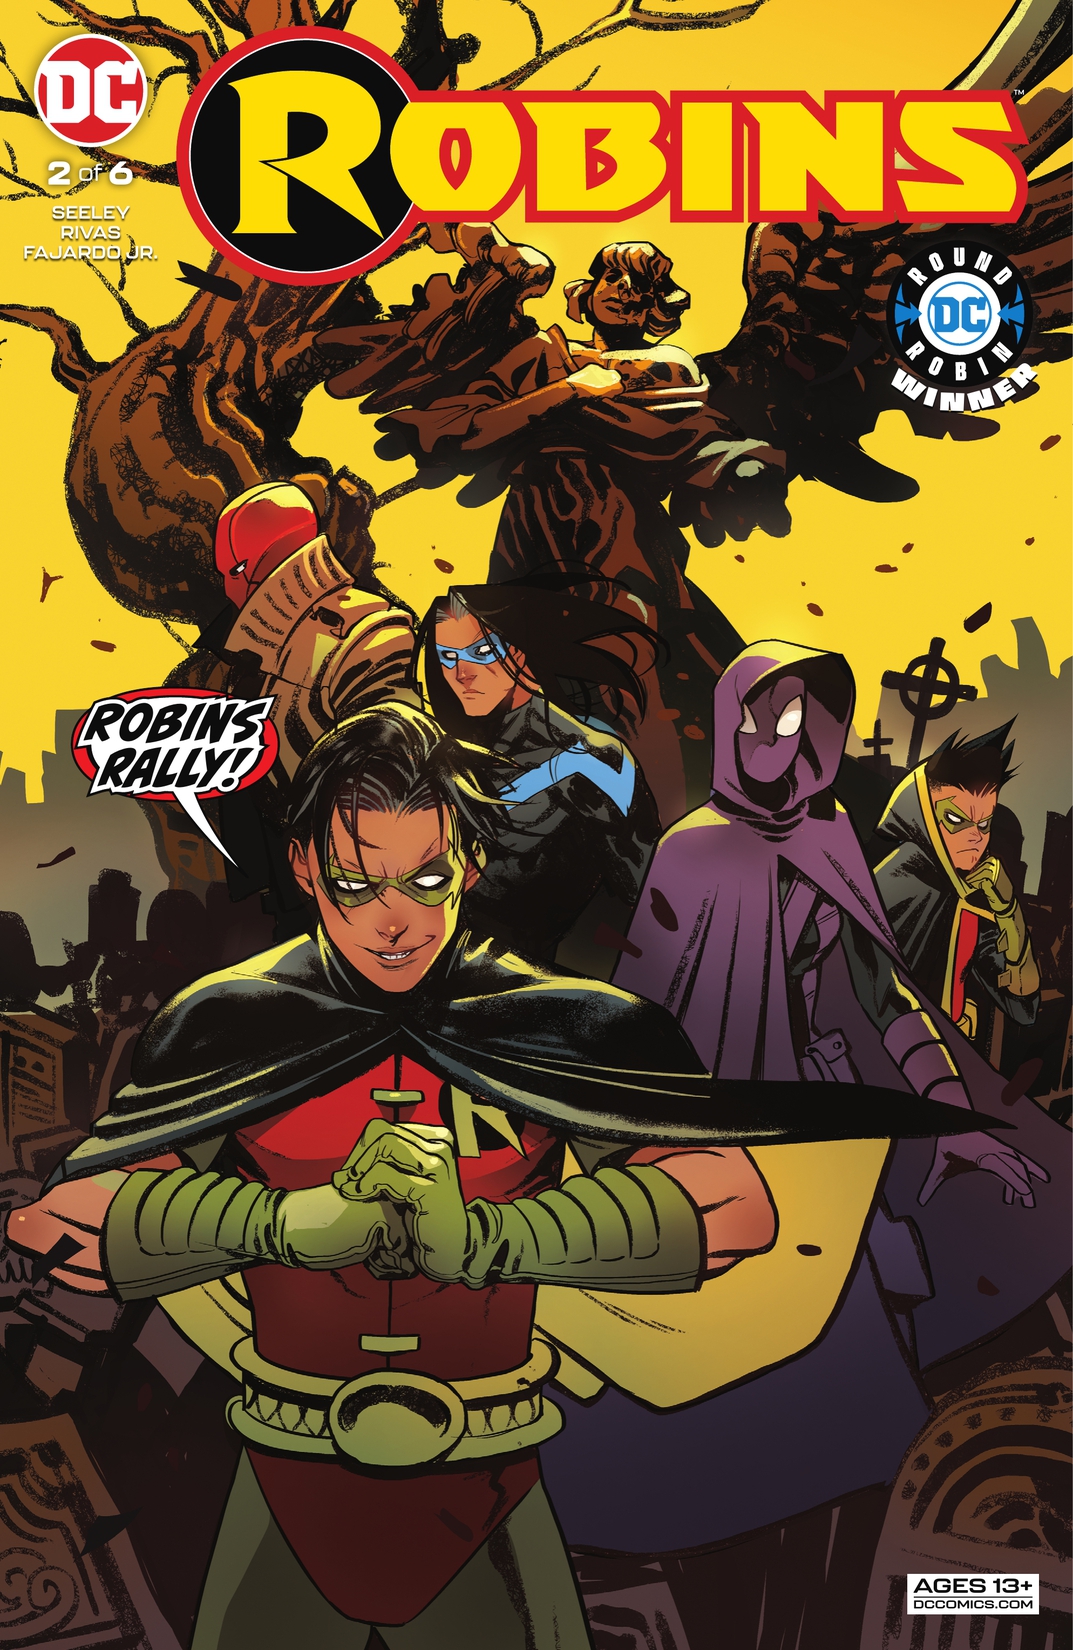 Robins #2 preview images